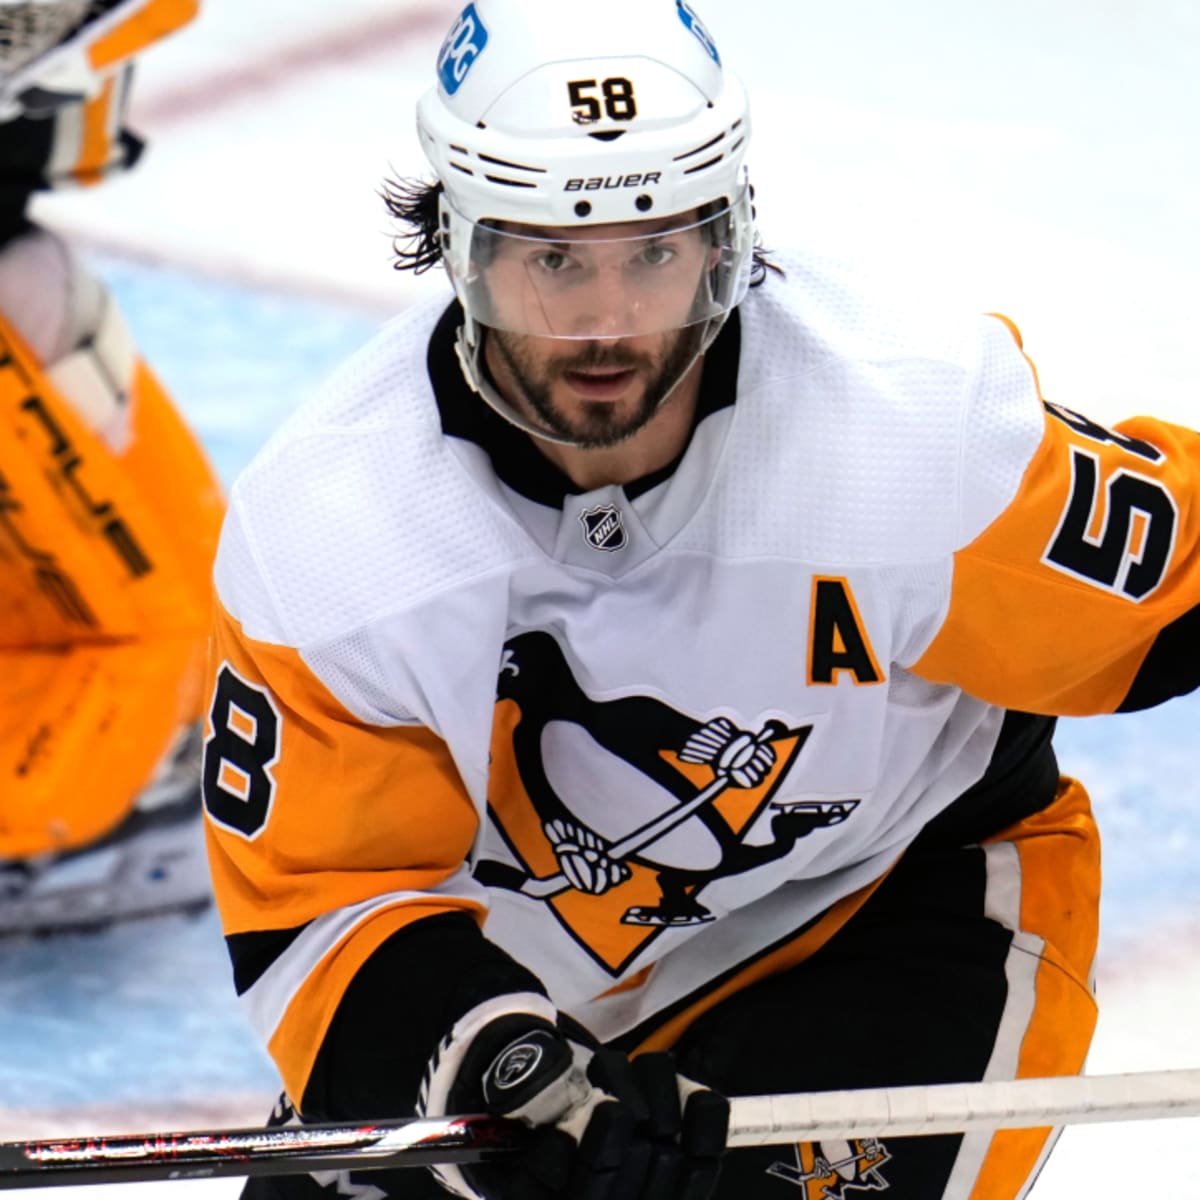 NHL Star Kris Letang Suffers Stroke, Out Indefinitely